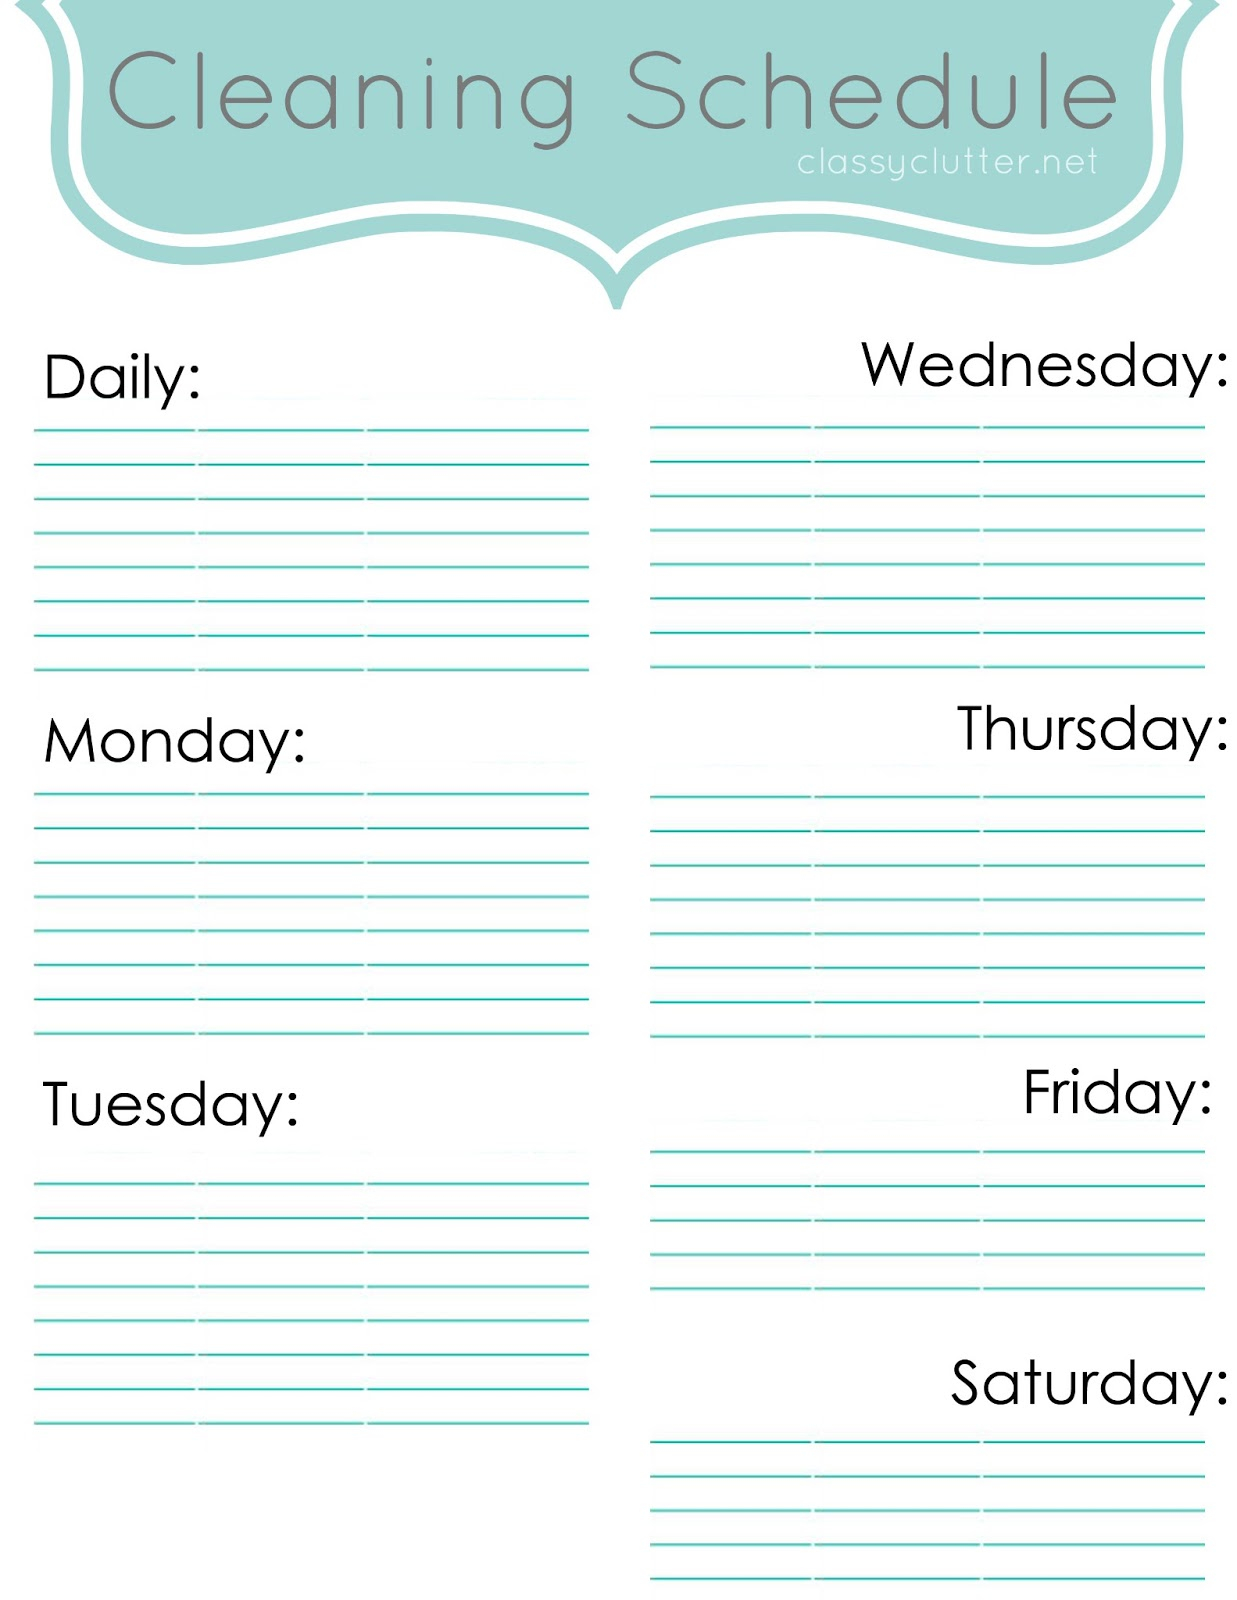 Weekly Cleaning Schedule Improve Your Cleaning Habits Classy Clutter